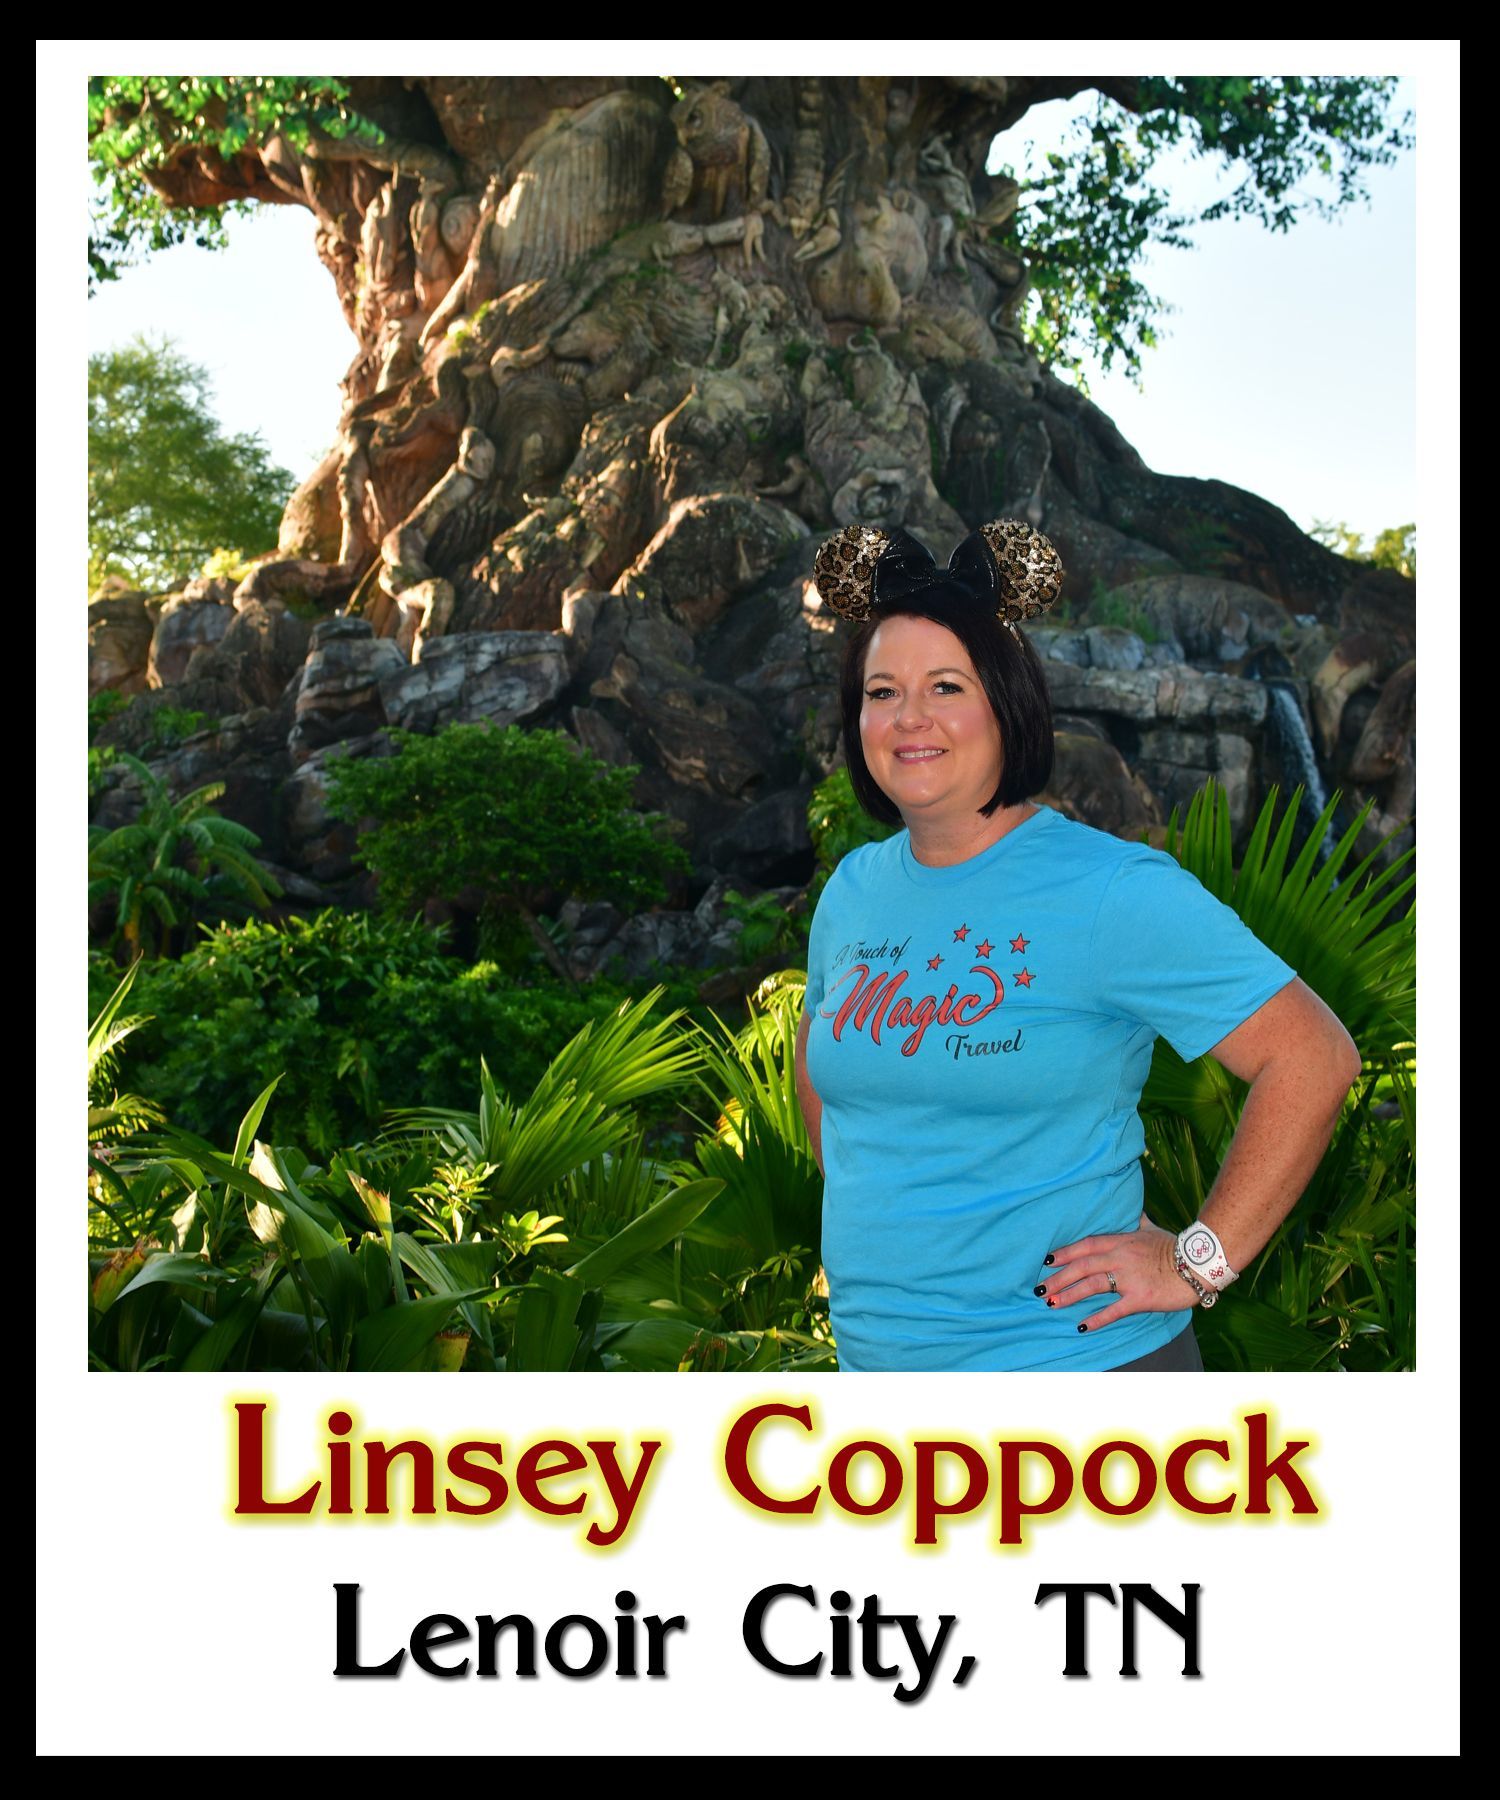 Linsey Coppock